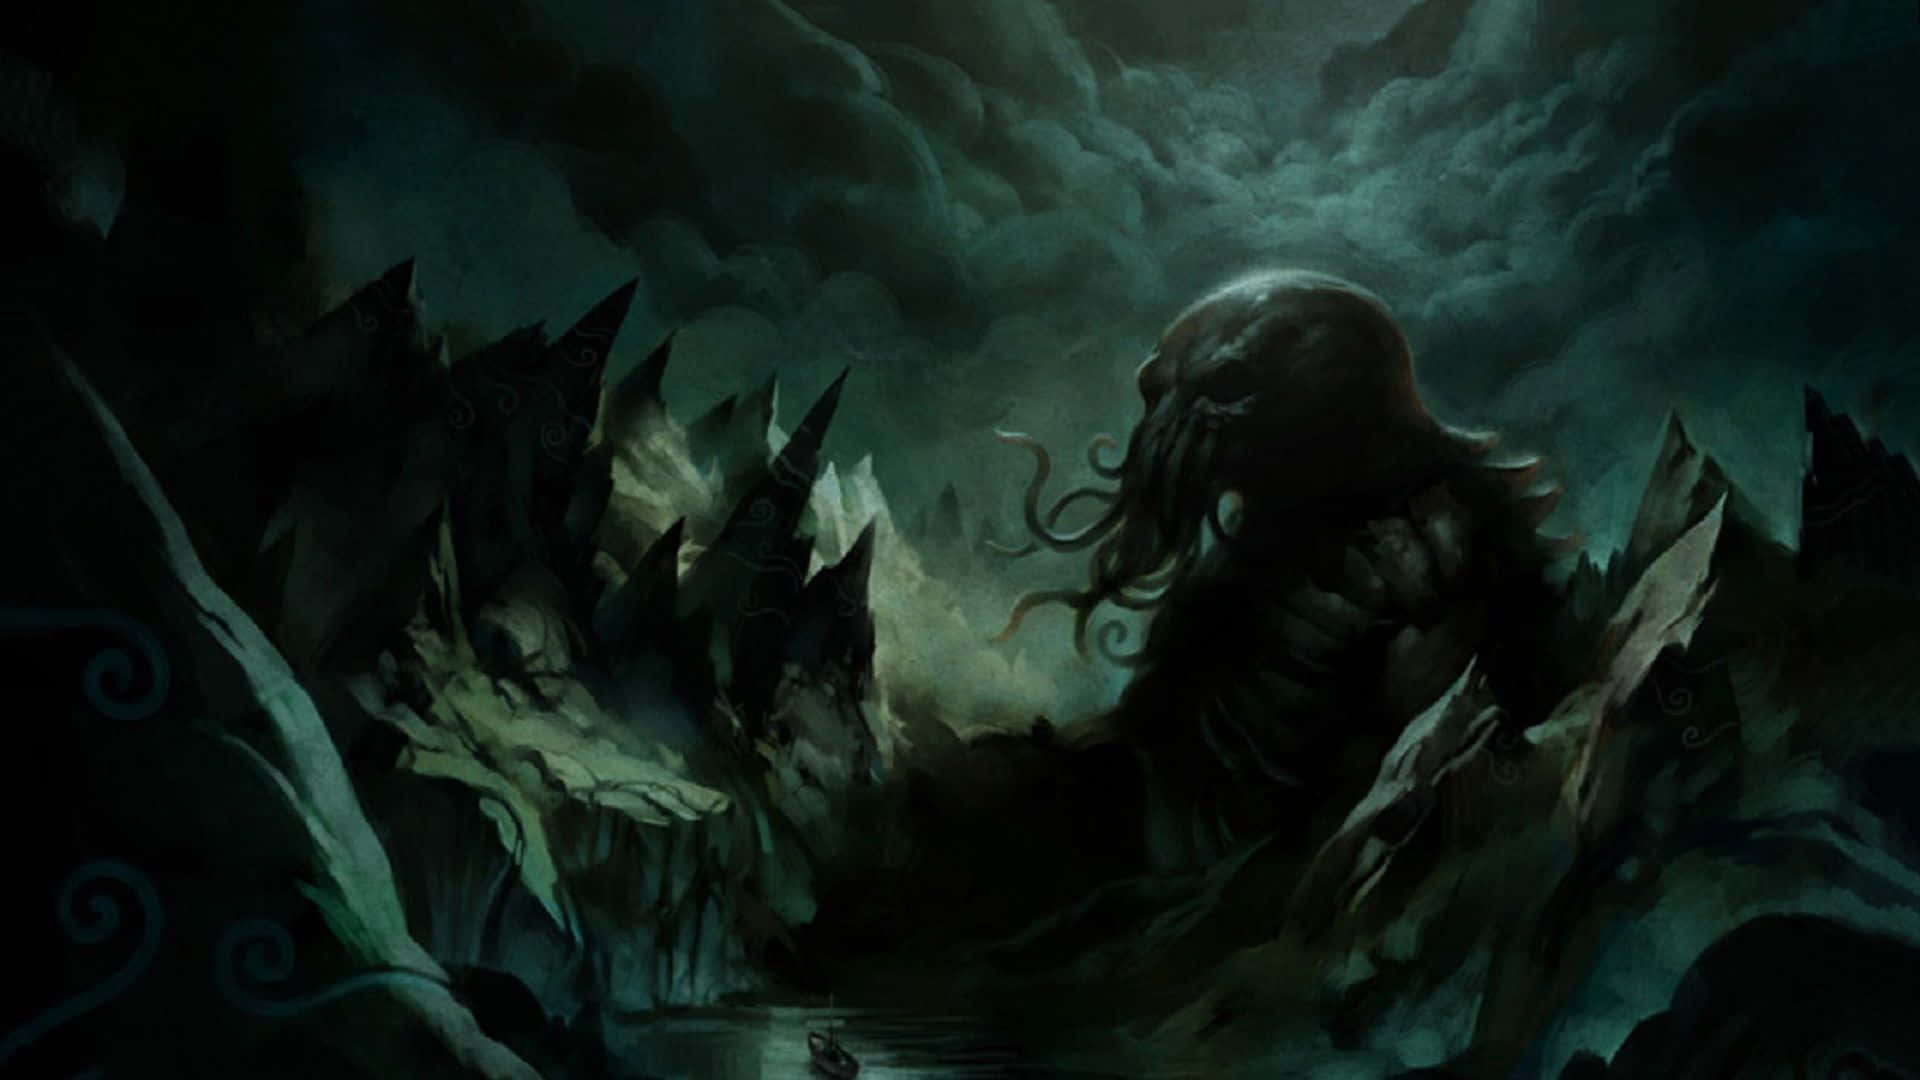 The Power of H. P. Lovecraft's Imagination